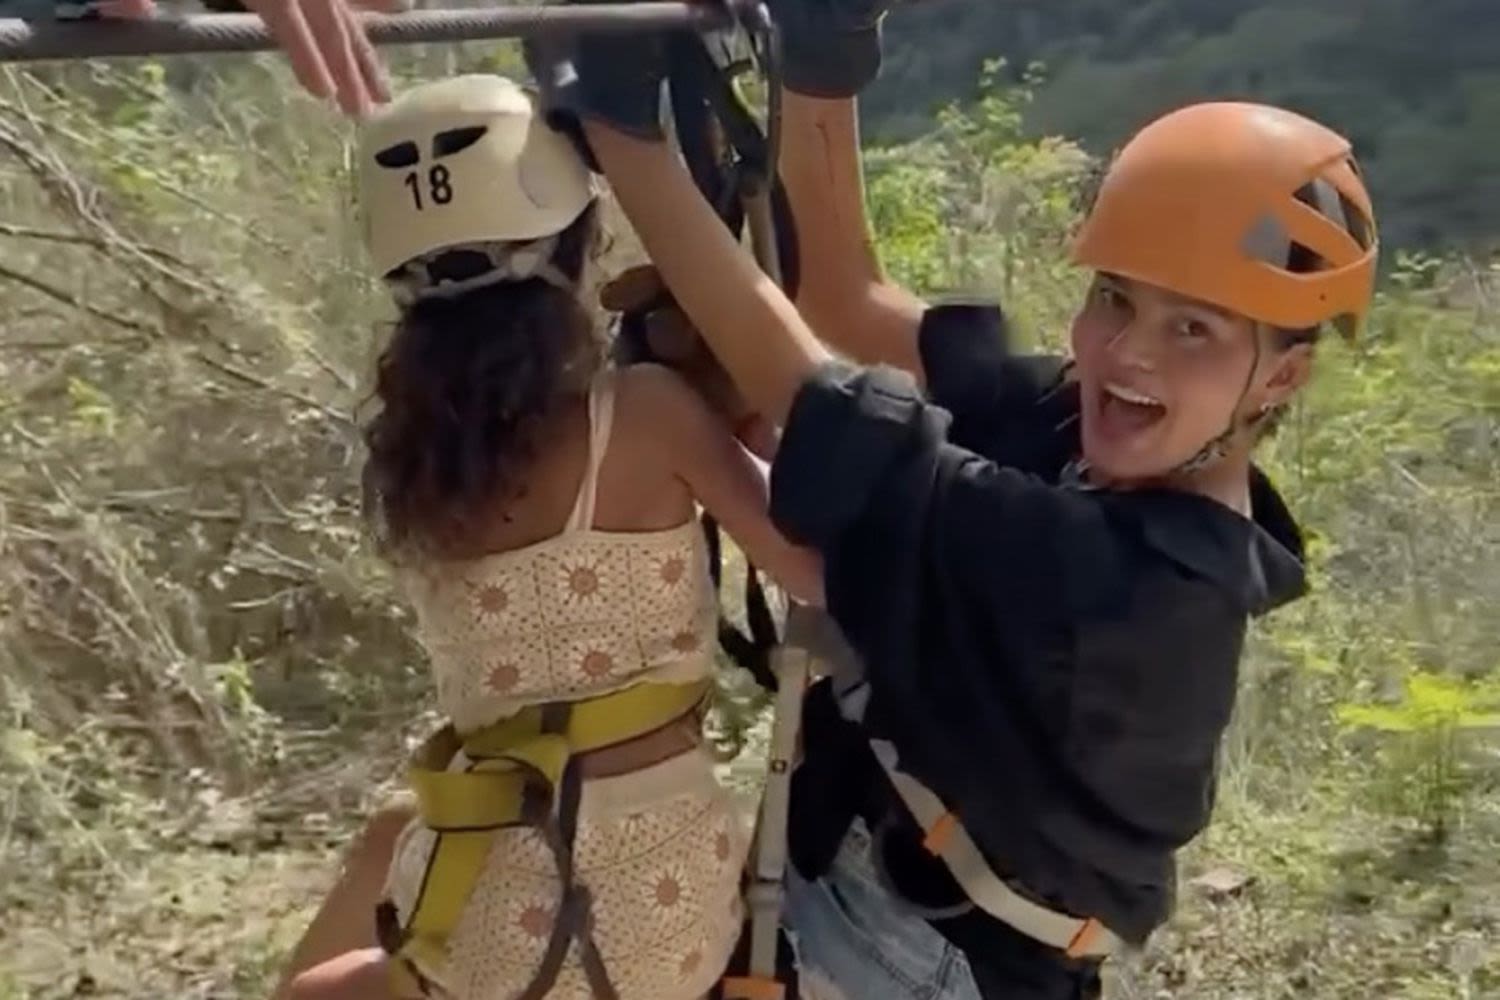 Chrissy Teigen Goes on Zip Line with Her Kids amid Mexico Vacation: 'Tip: Try Not to Wear Denim Daisy Dukes'